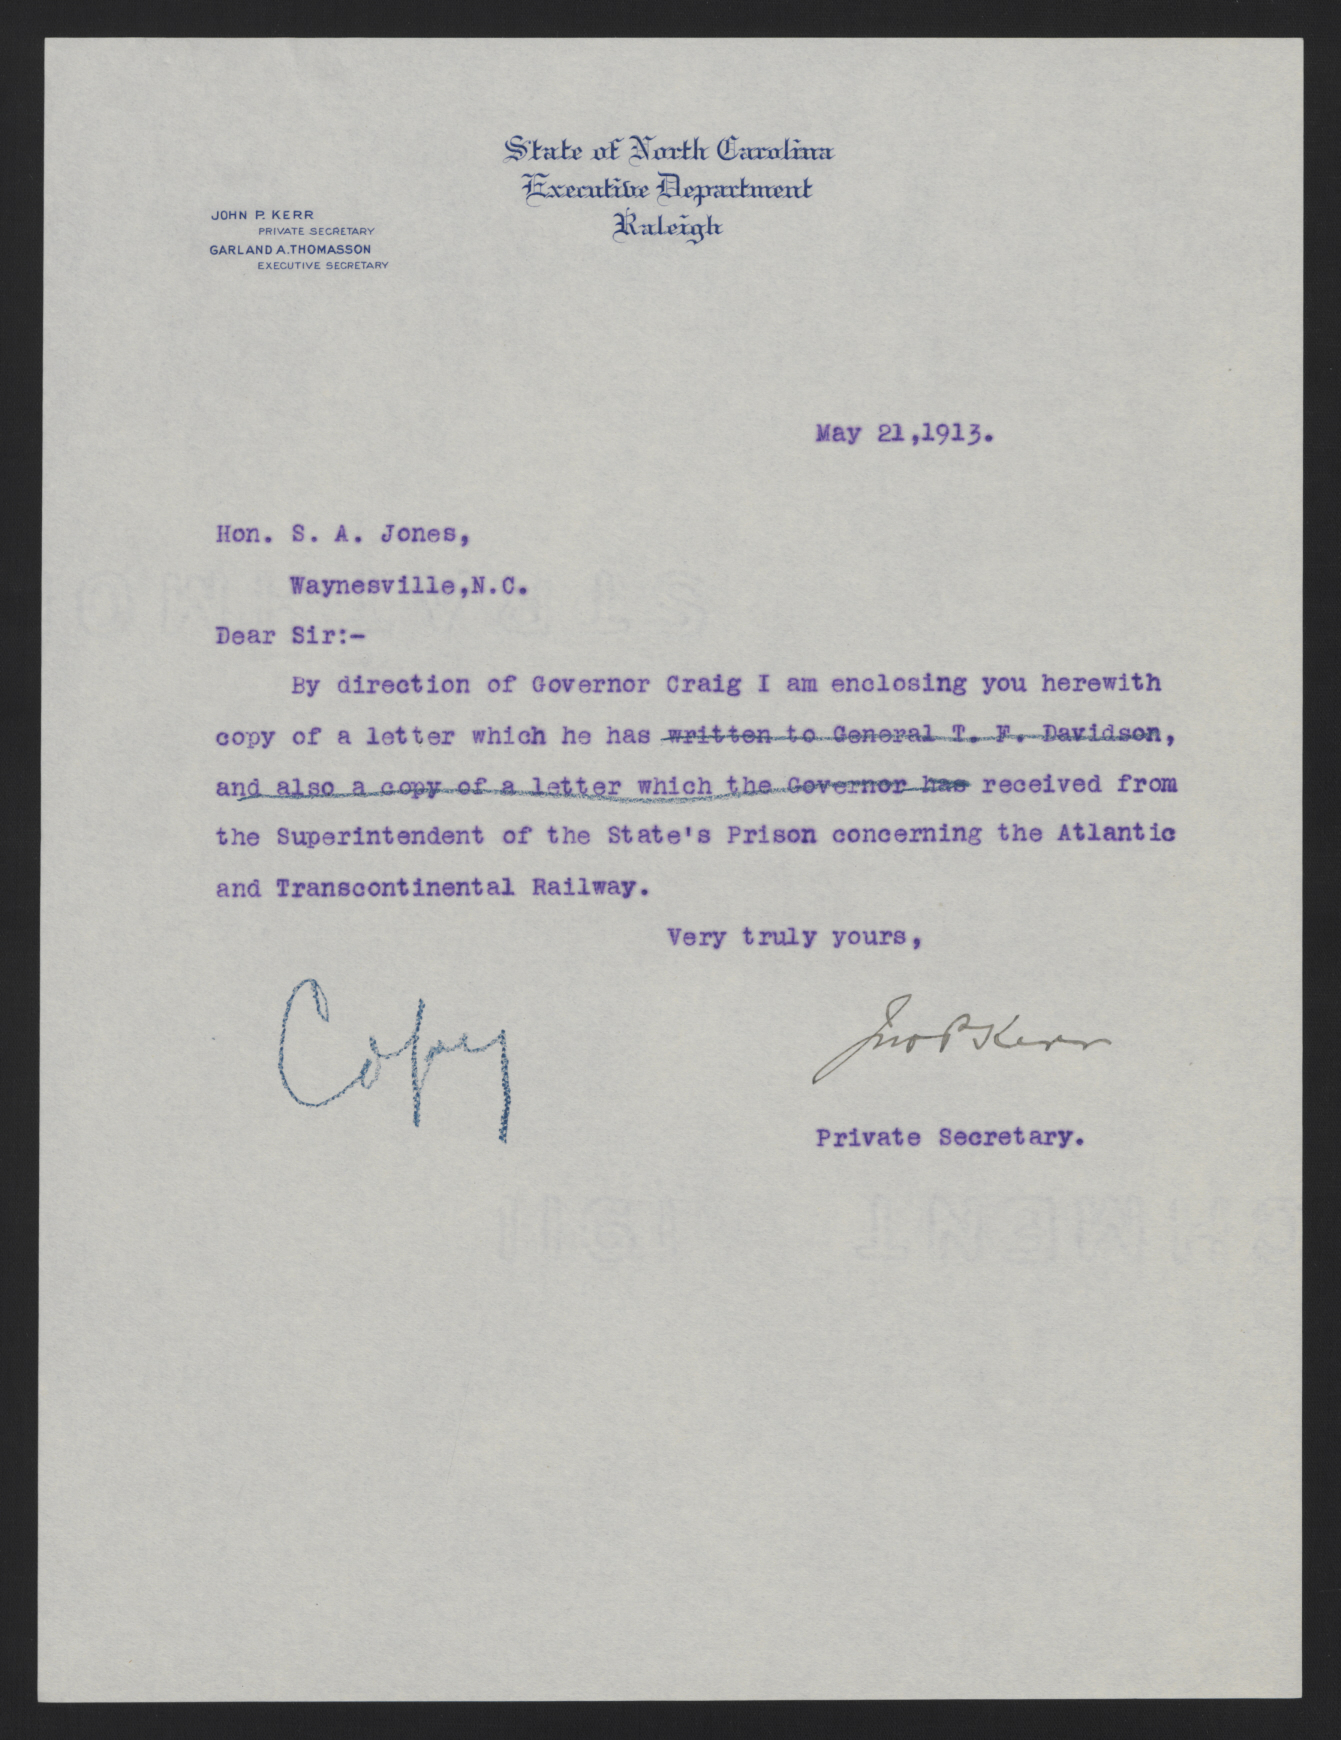 Letter from Kerr to Jones, May 21, 1913